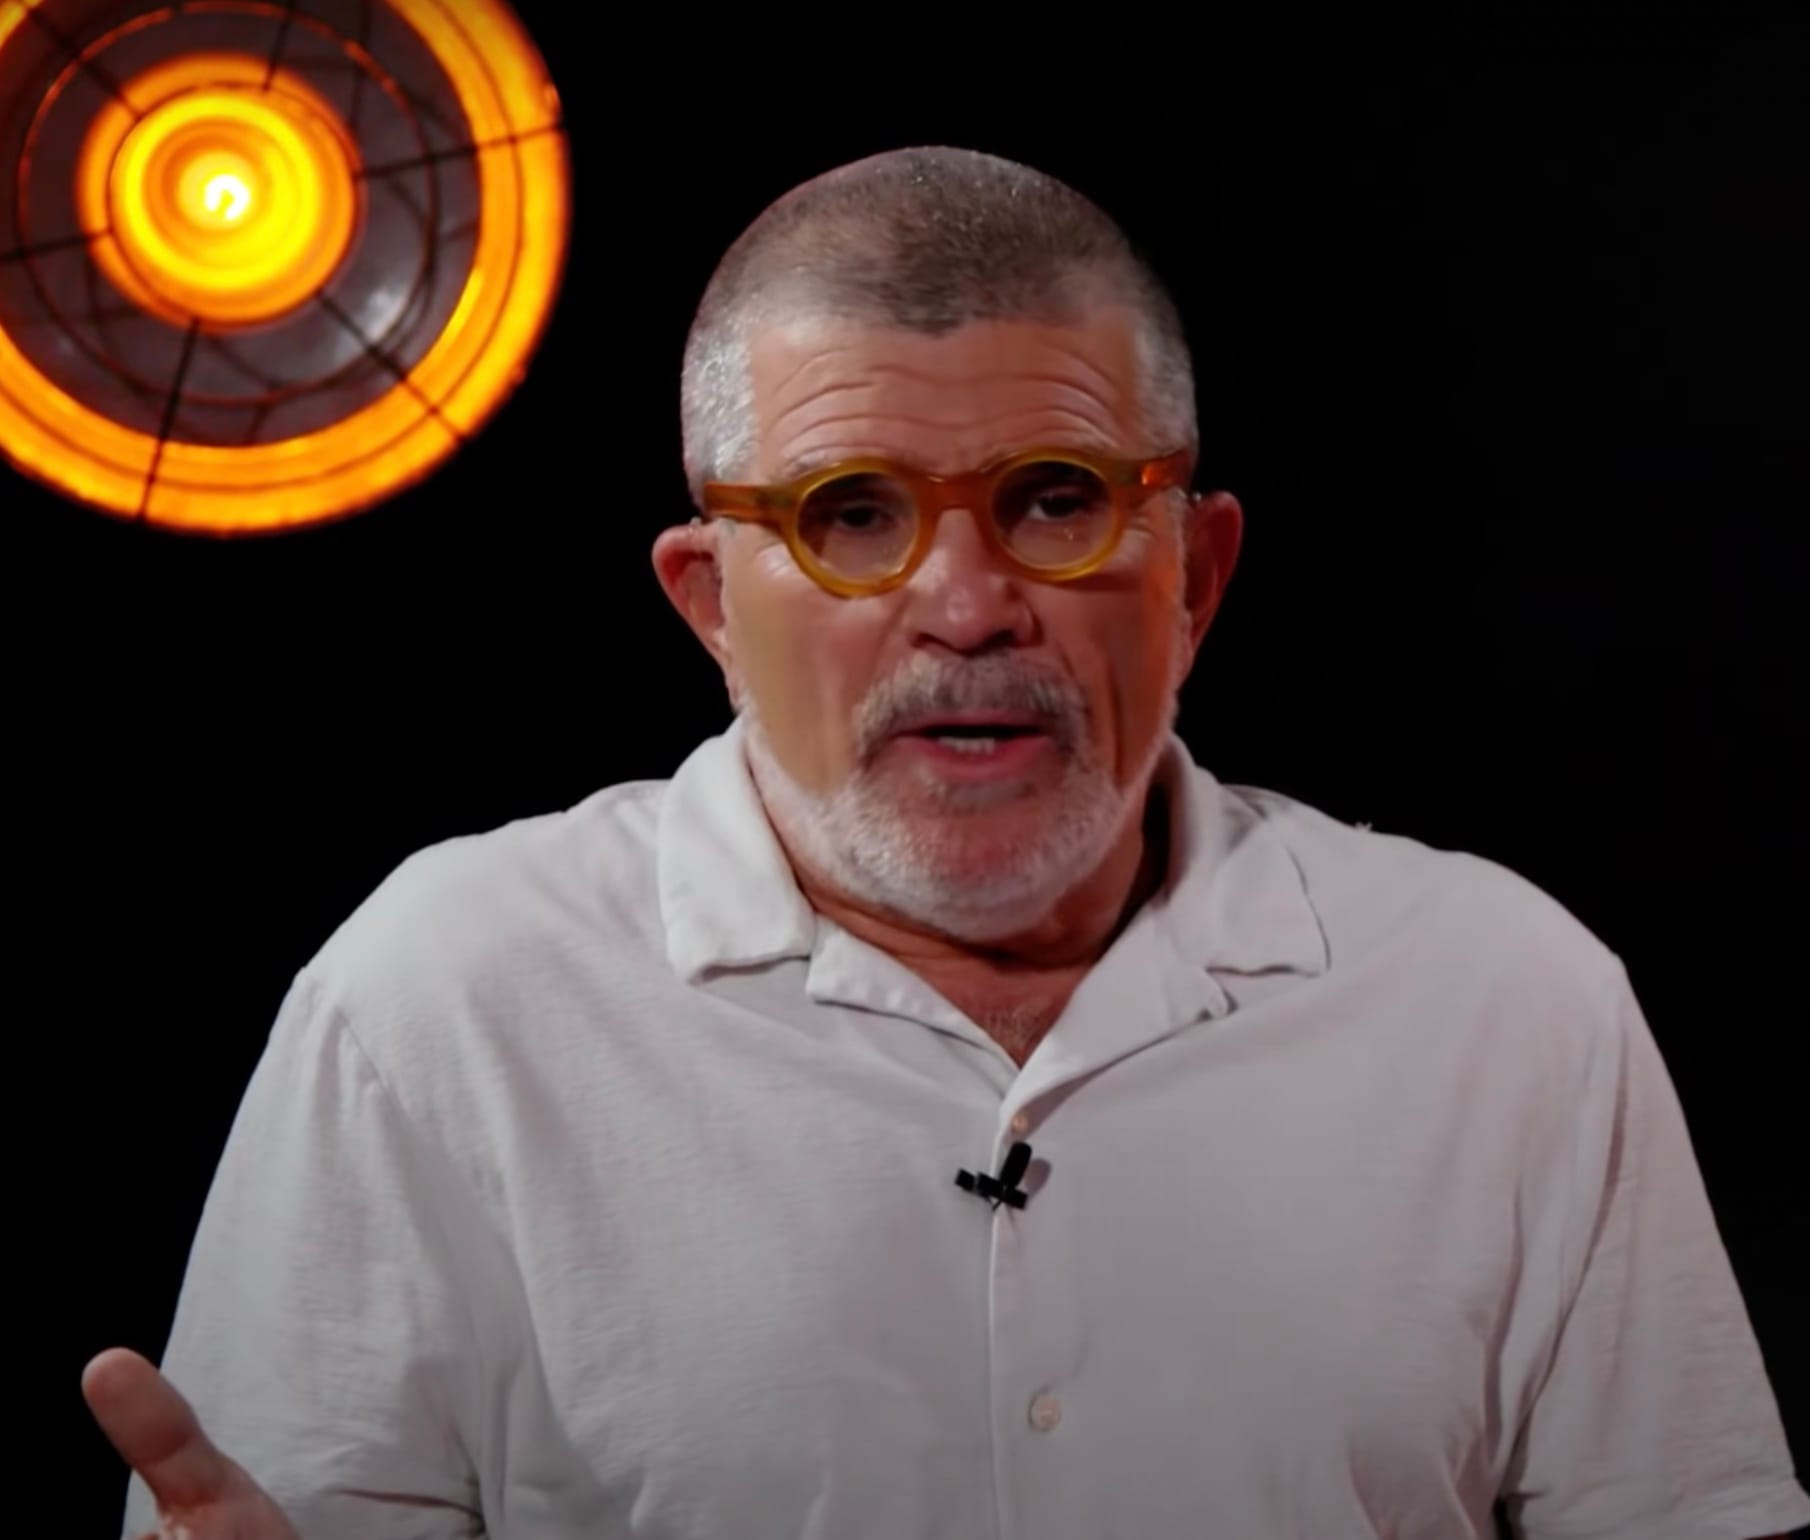 David Mamet's New Book "Everywhere an Oink Oink" Rakes Hollywood Culture Over Coals